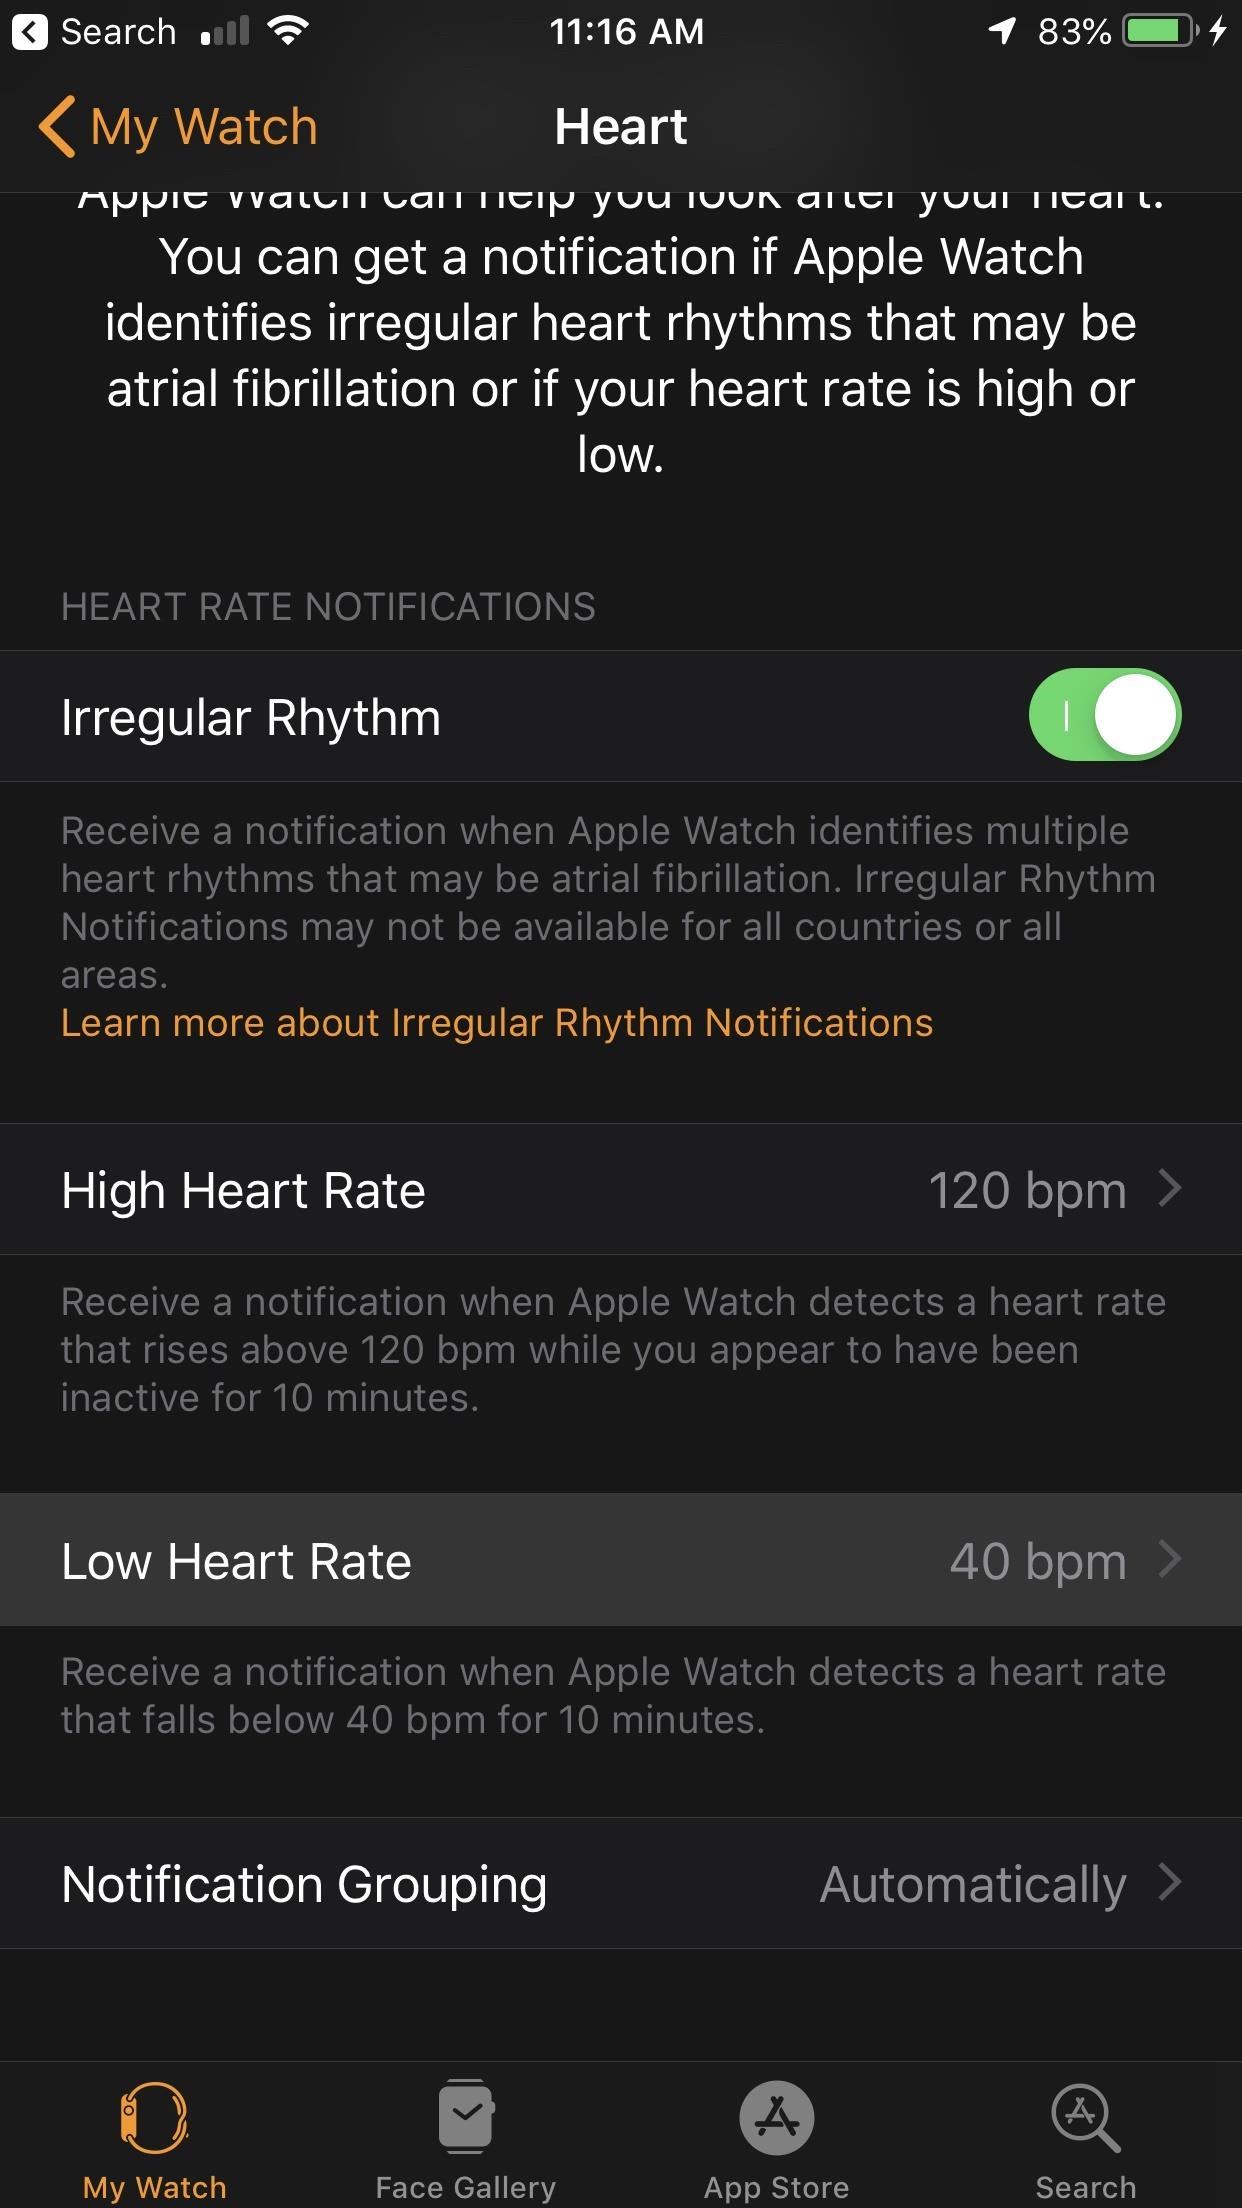 What to Do When You Get a Low Heart Rate Notification on Your Apple Watch